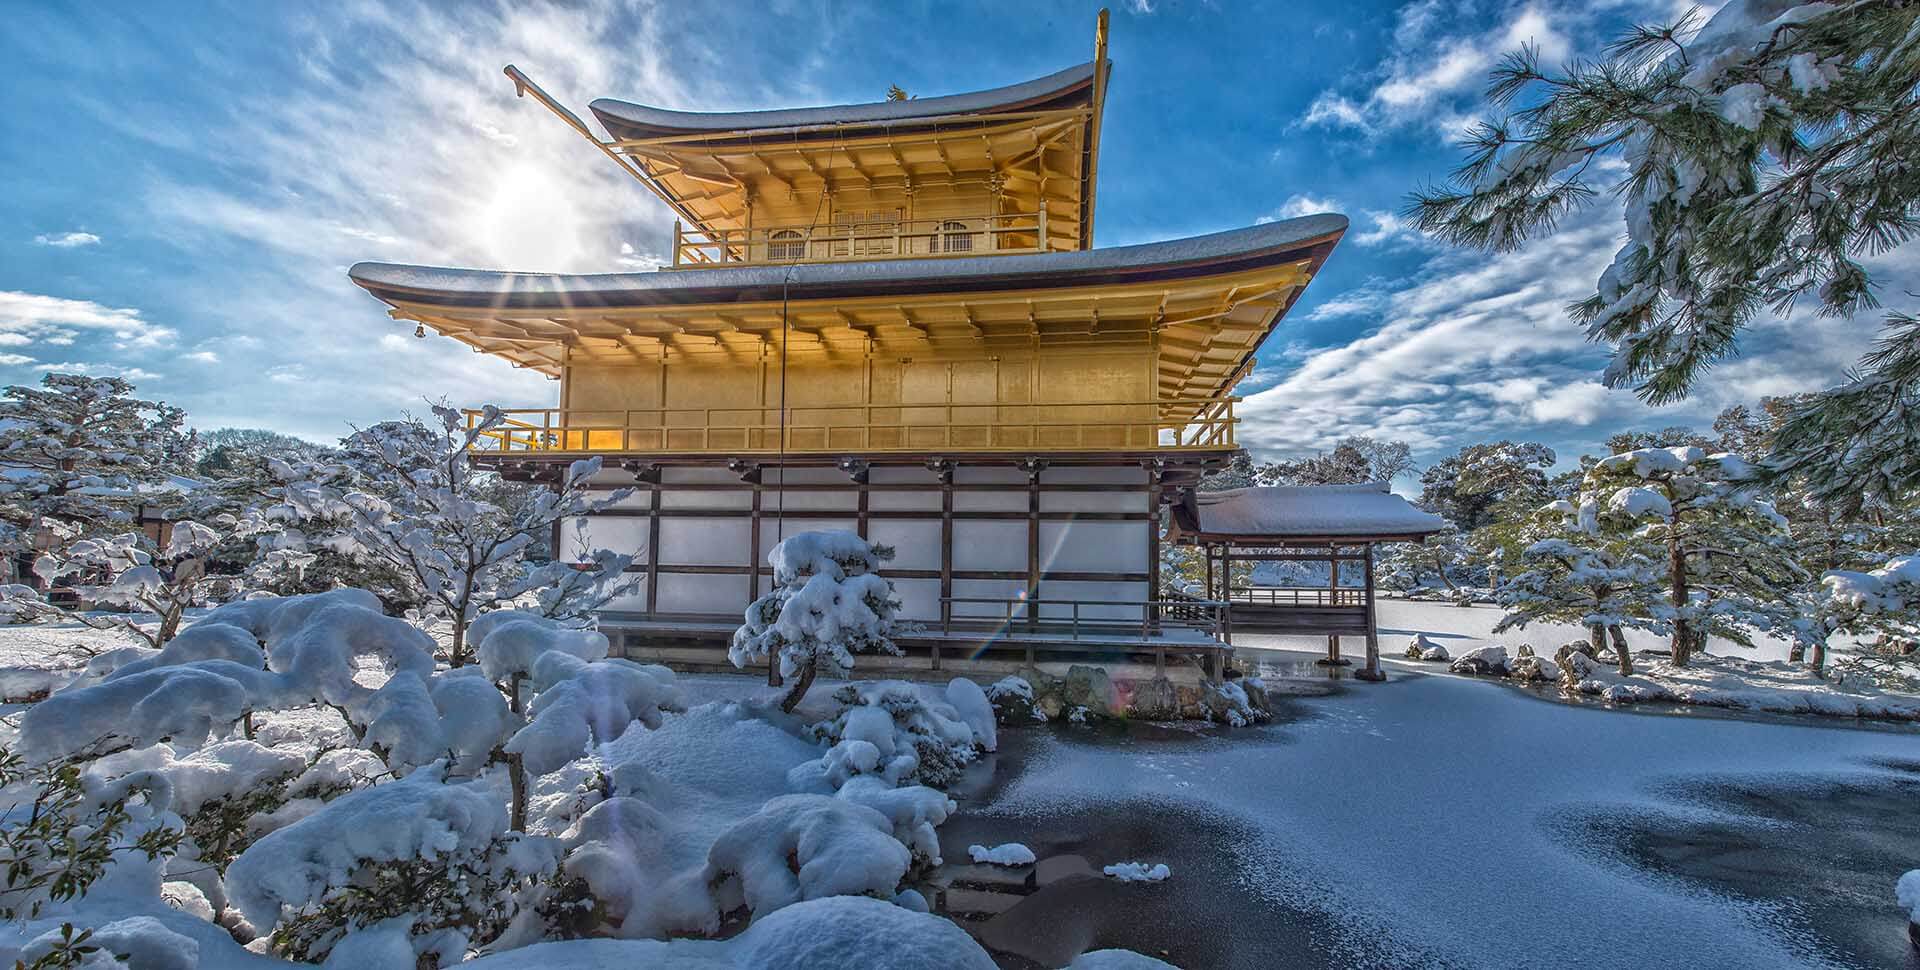 The snow in winter of Golden Pavilion Temple in Kyoto, Japan. The temperature in cold winter will drop to -10 degree and reach to 40 degree hot in the summer.